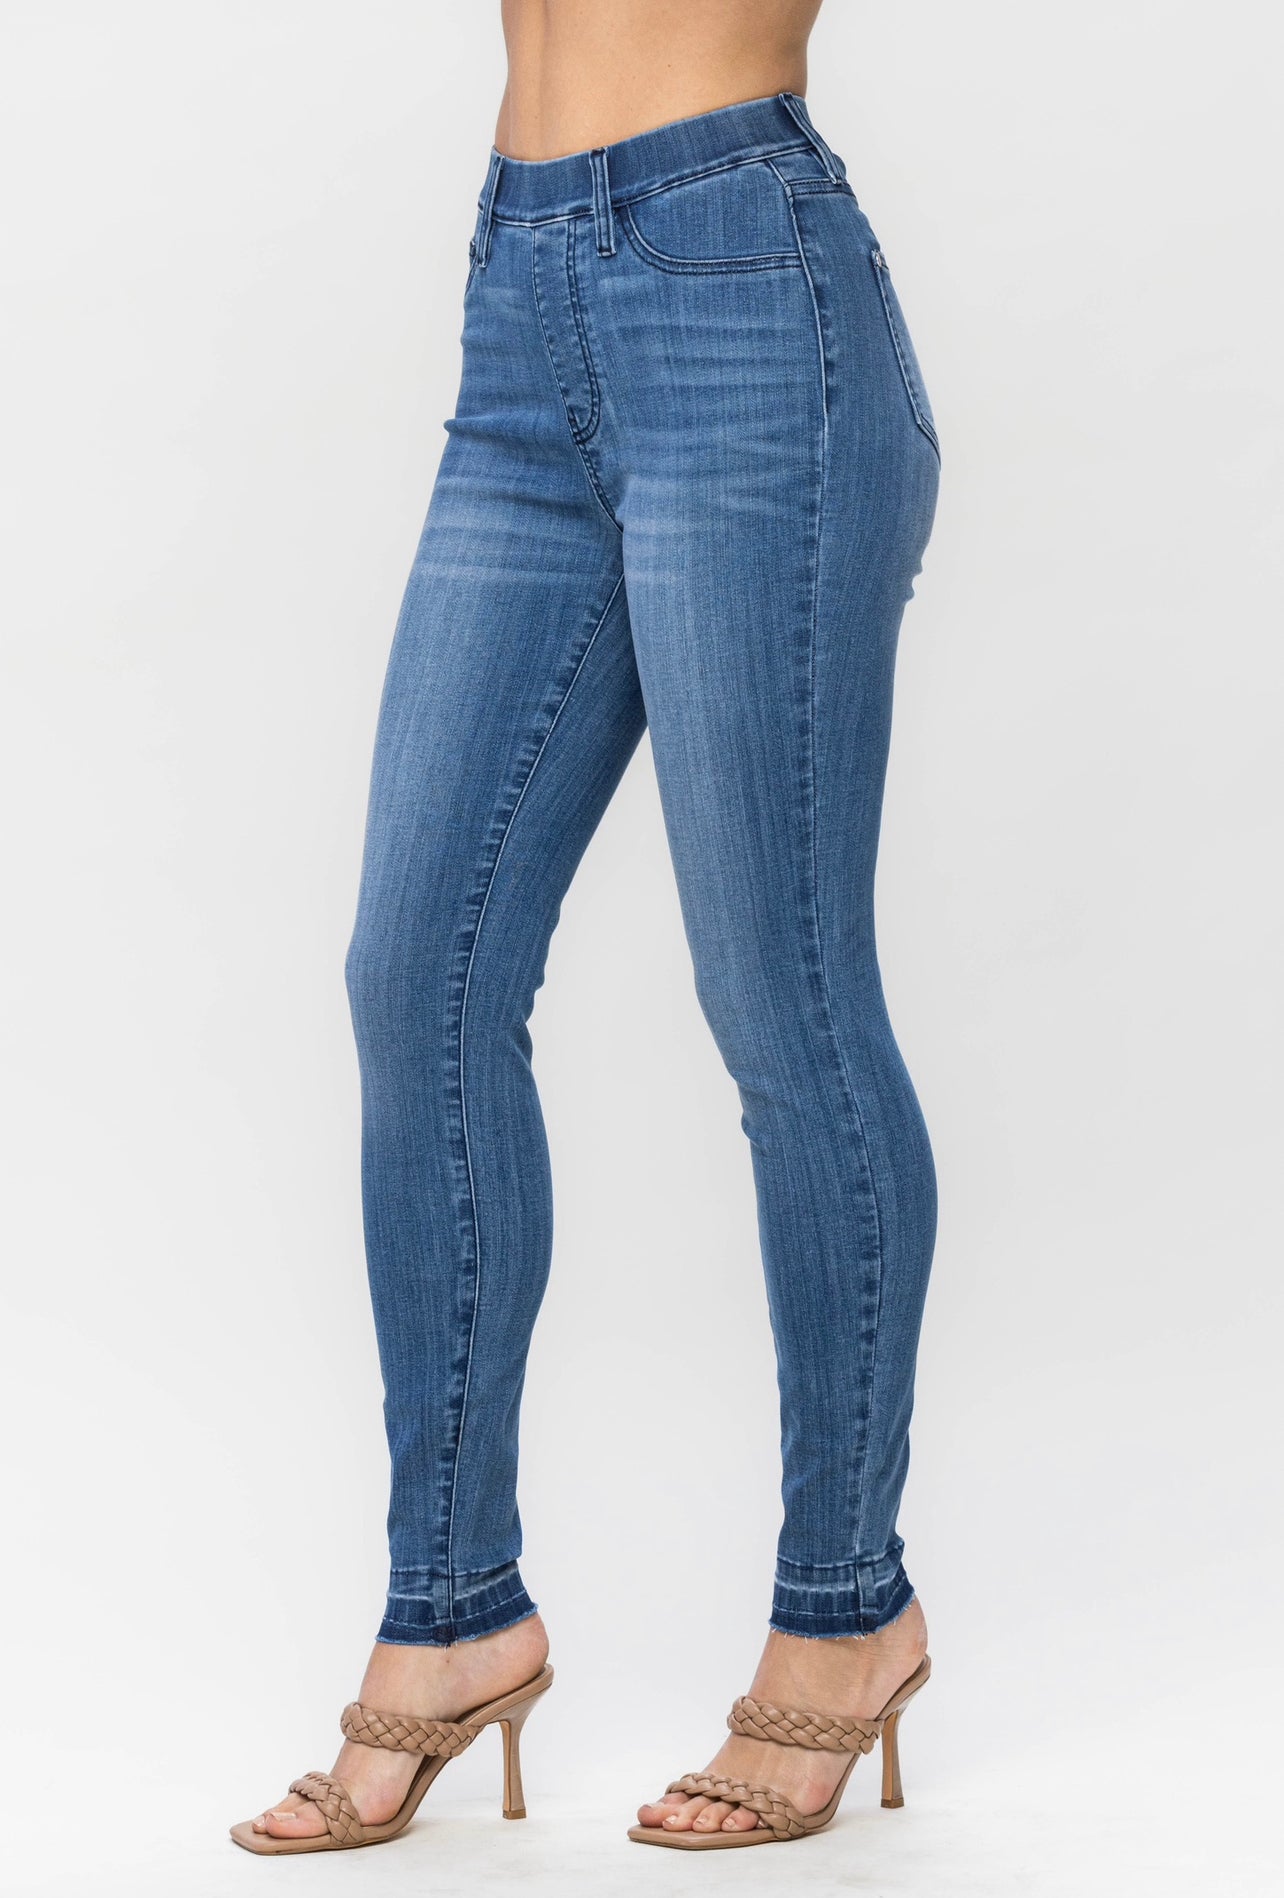 High Rise Skinny Pull On Jeans by Judy Blue